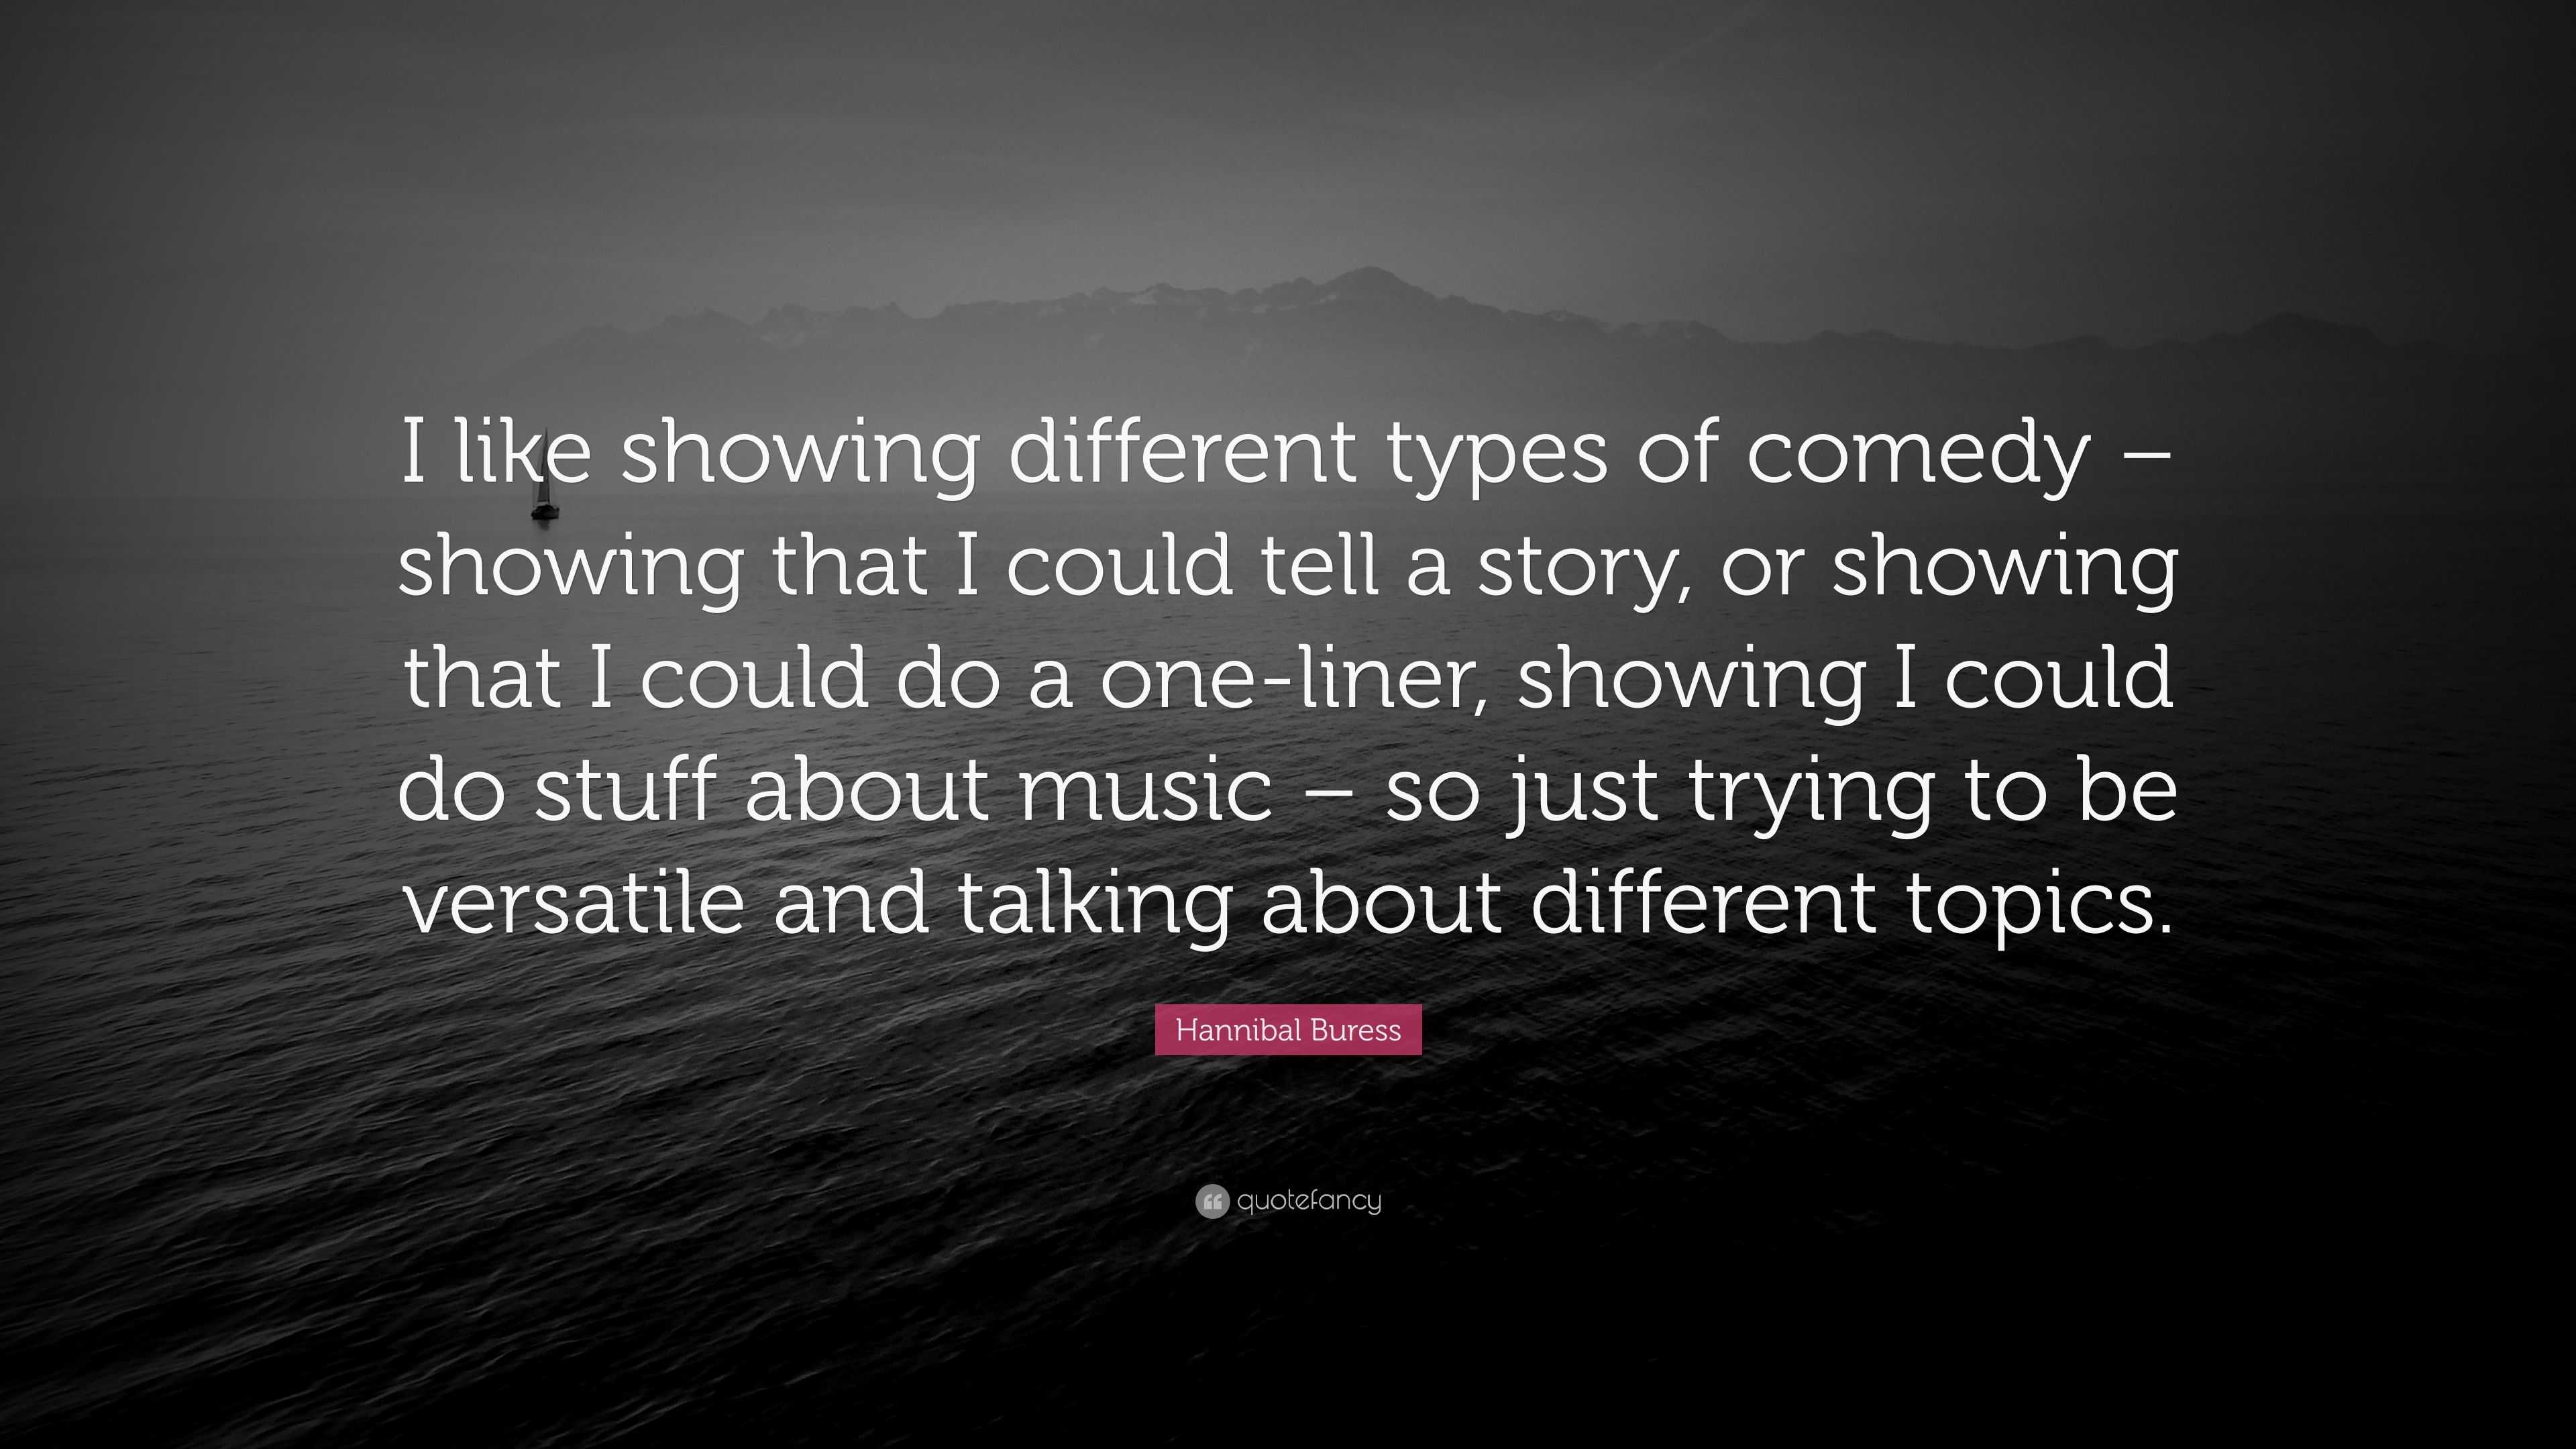 Hannibal Buress Quote: “I like showing different types of comedy ...